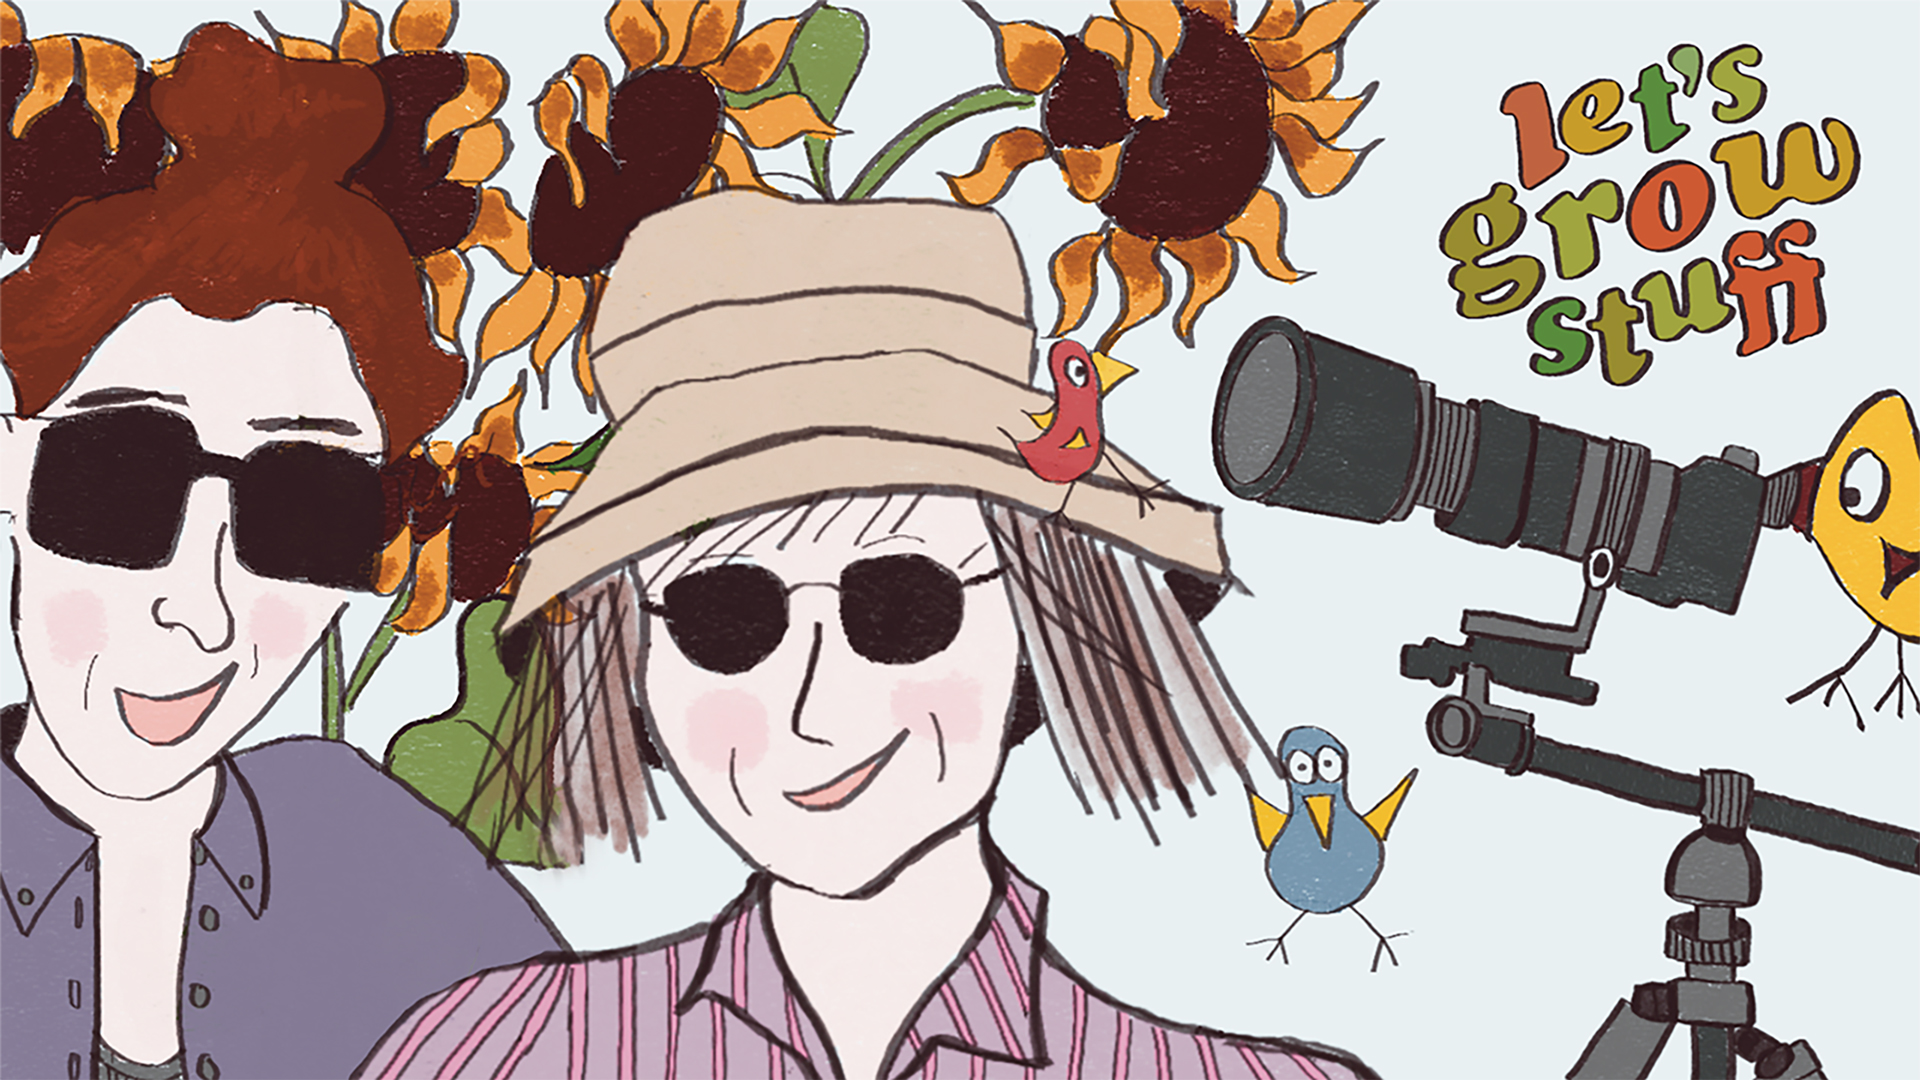 An illustration of PBS Wisconsin Let's Grow Stuff gardeners/producers Laurie Gorman and Emily Julka standing in front of tall sunflowers. To their right is a video camera with three birds lingering curiously around it.